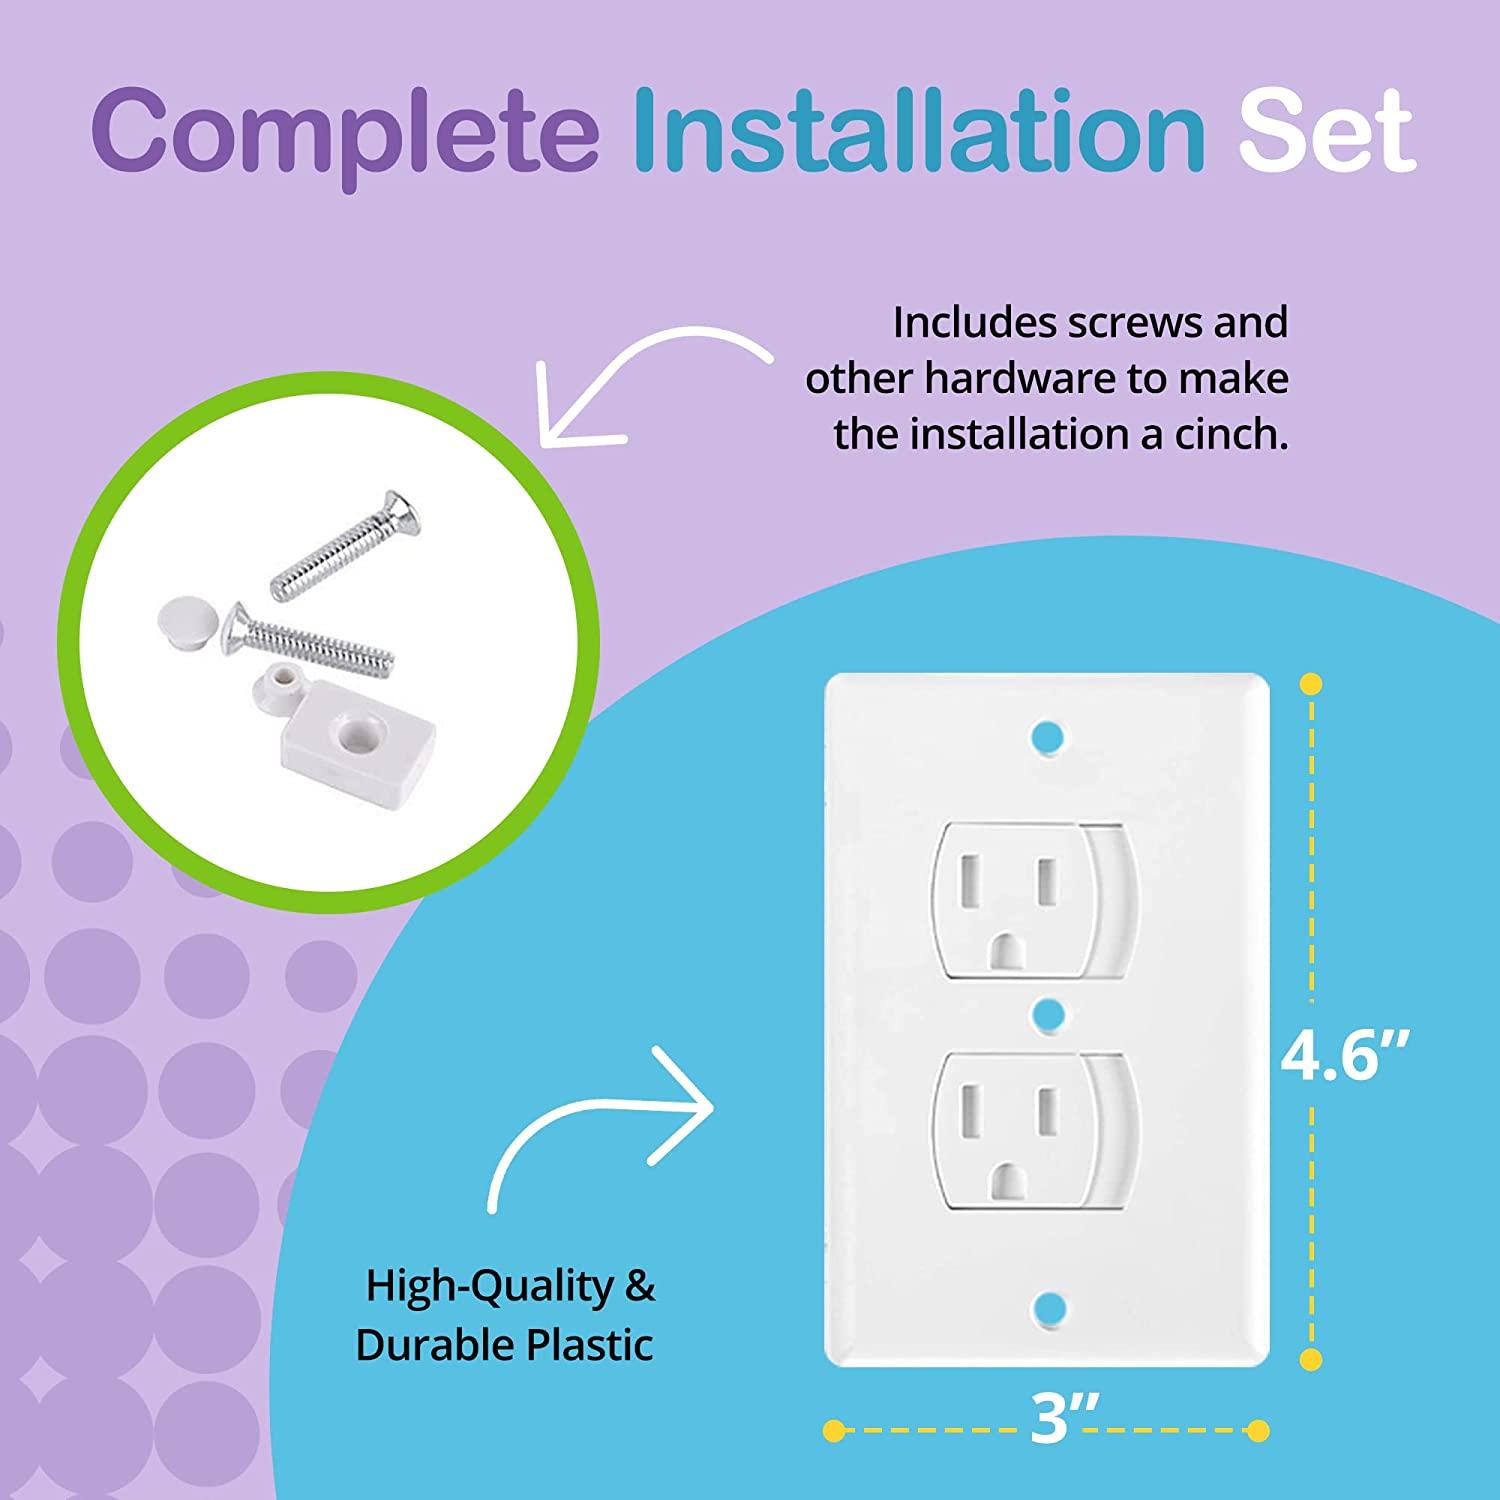 Self-Closing Electrical Outlets & Plug Protectors